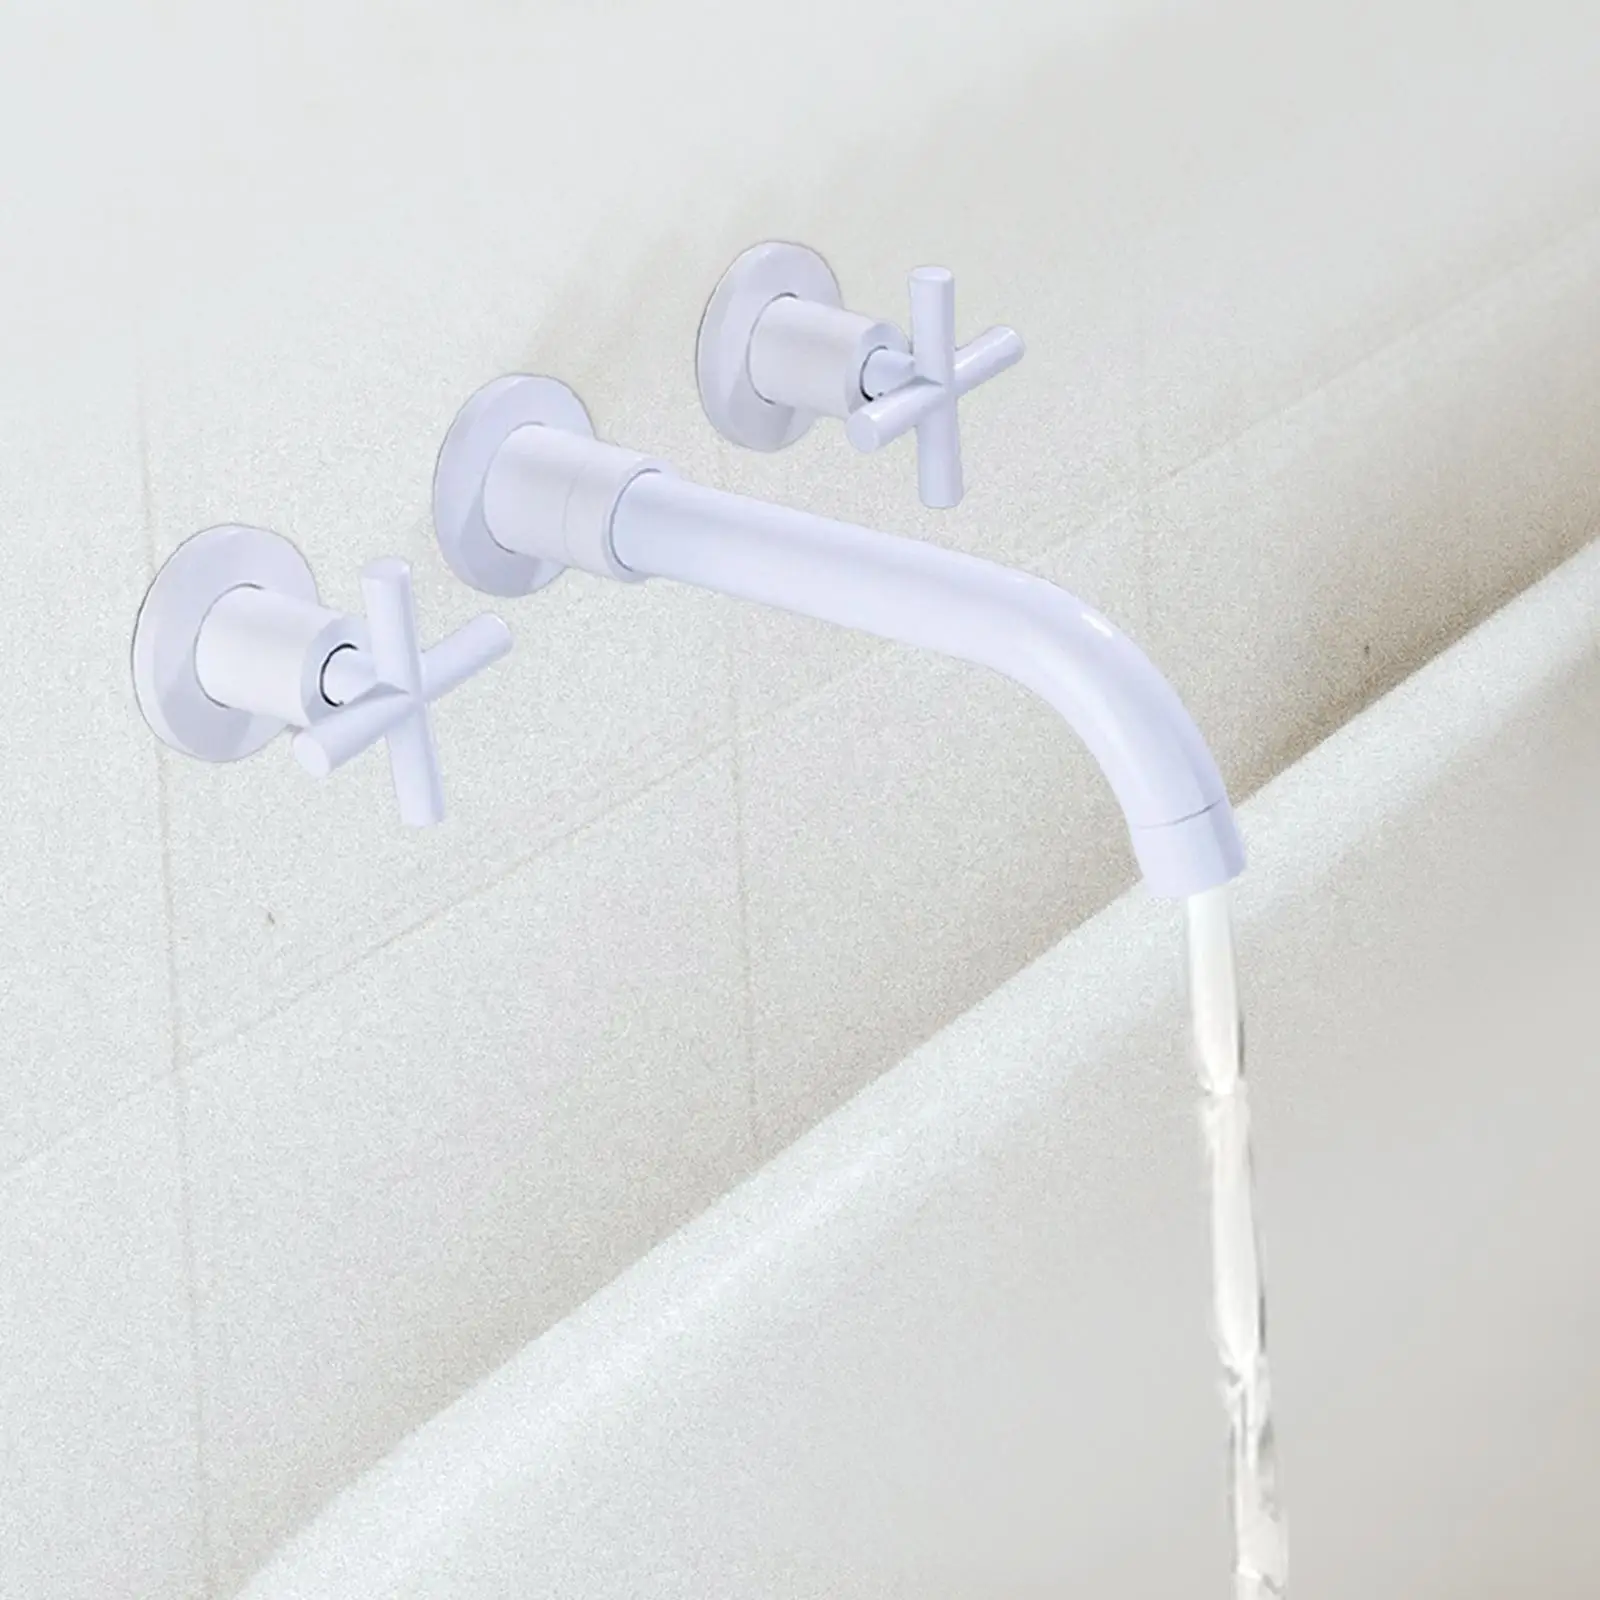 Wall Mounted Sink Tap Swivel Spout Double Cross Handles Kitchen Mixer Tap Bathroom Basin Sink Faucet for Laundry Kitchen Bathtub